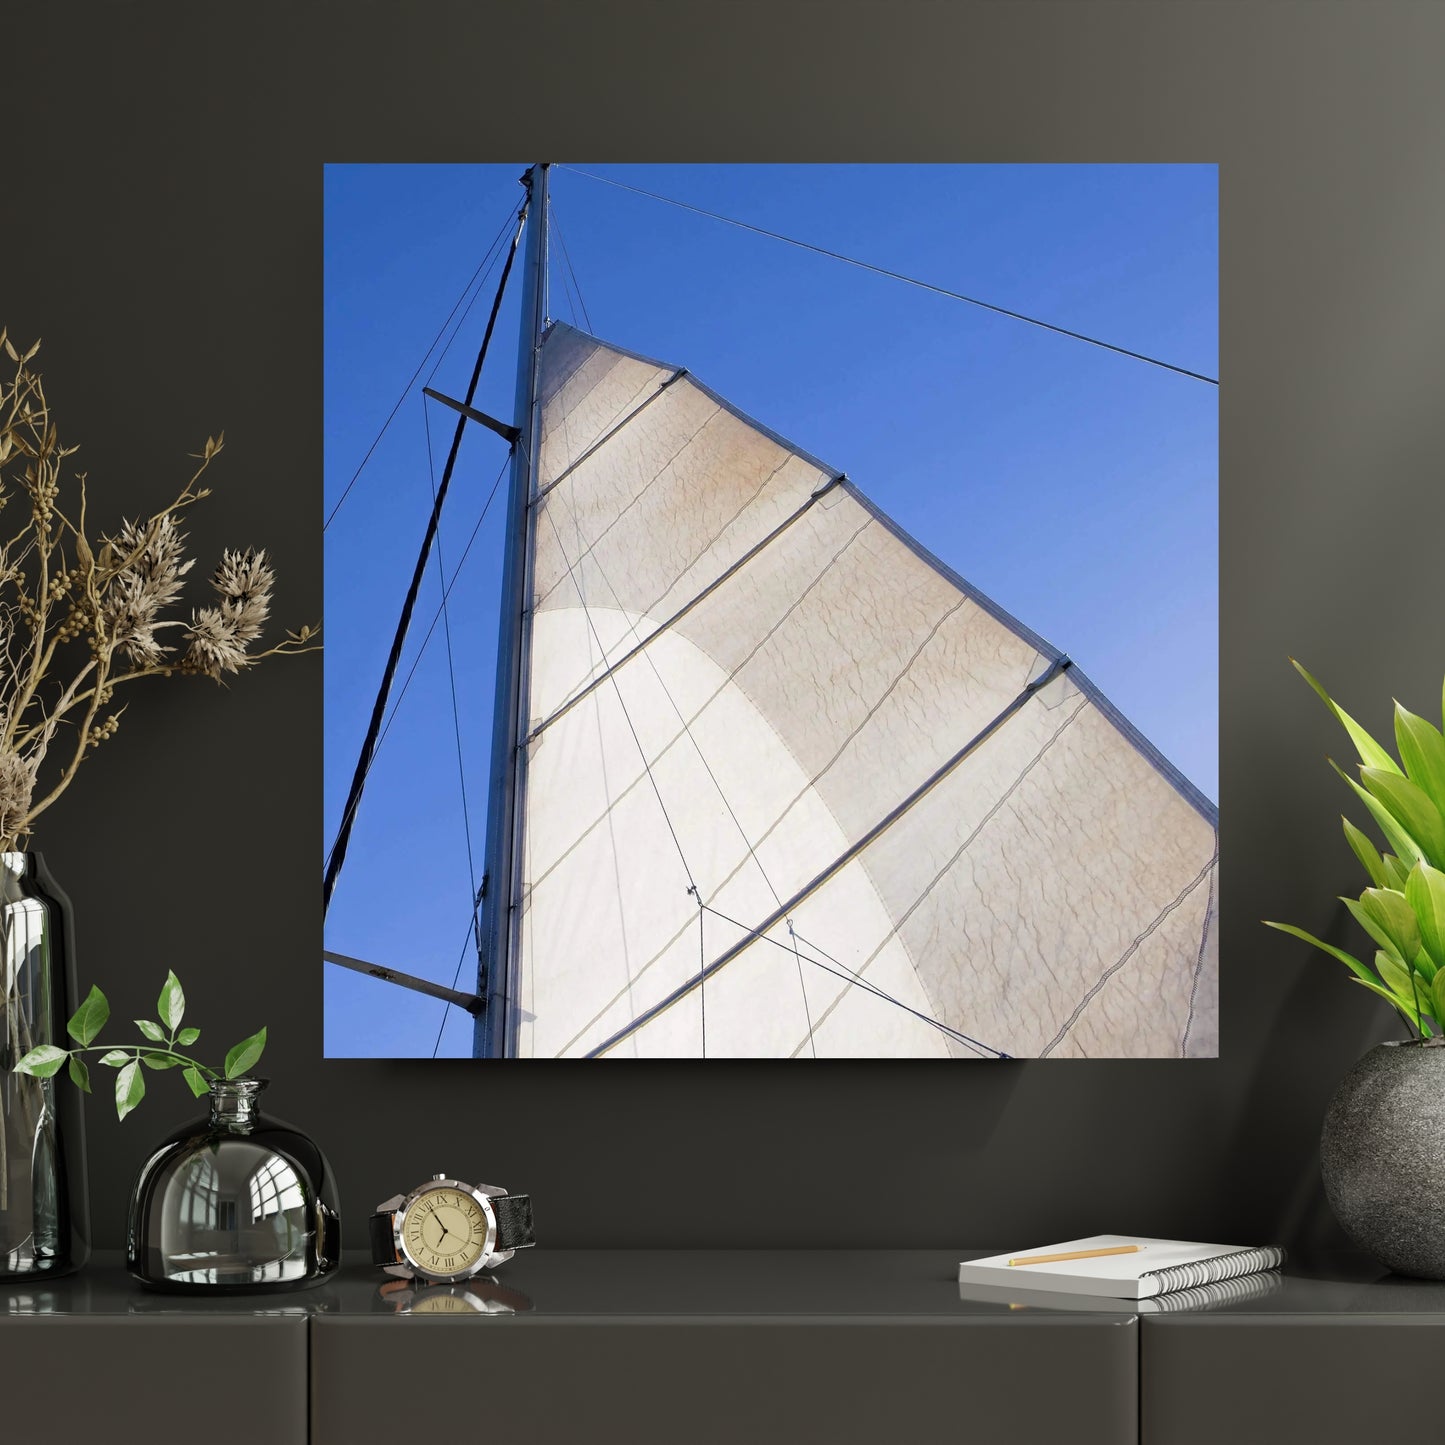 large art of sailboat sail and mast hanging above a shelf in bedroom or office